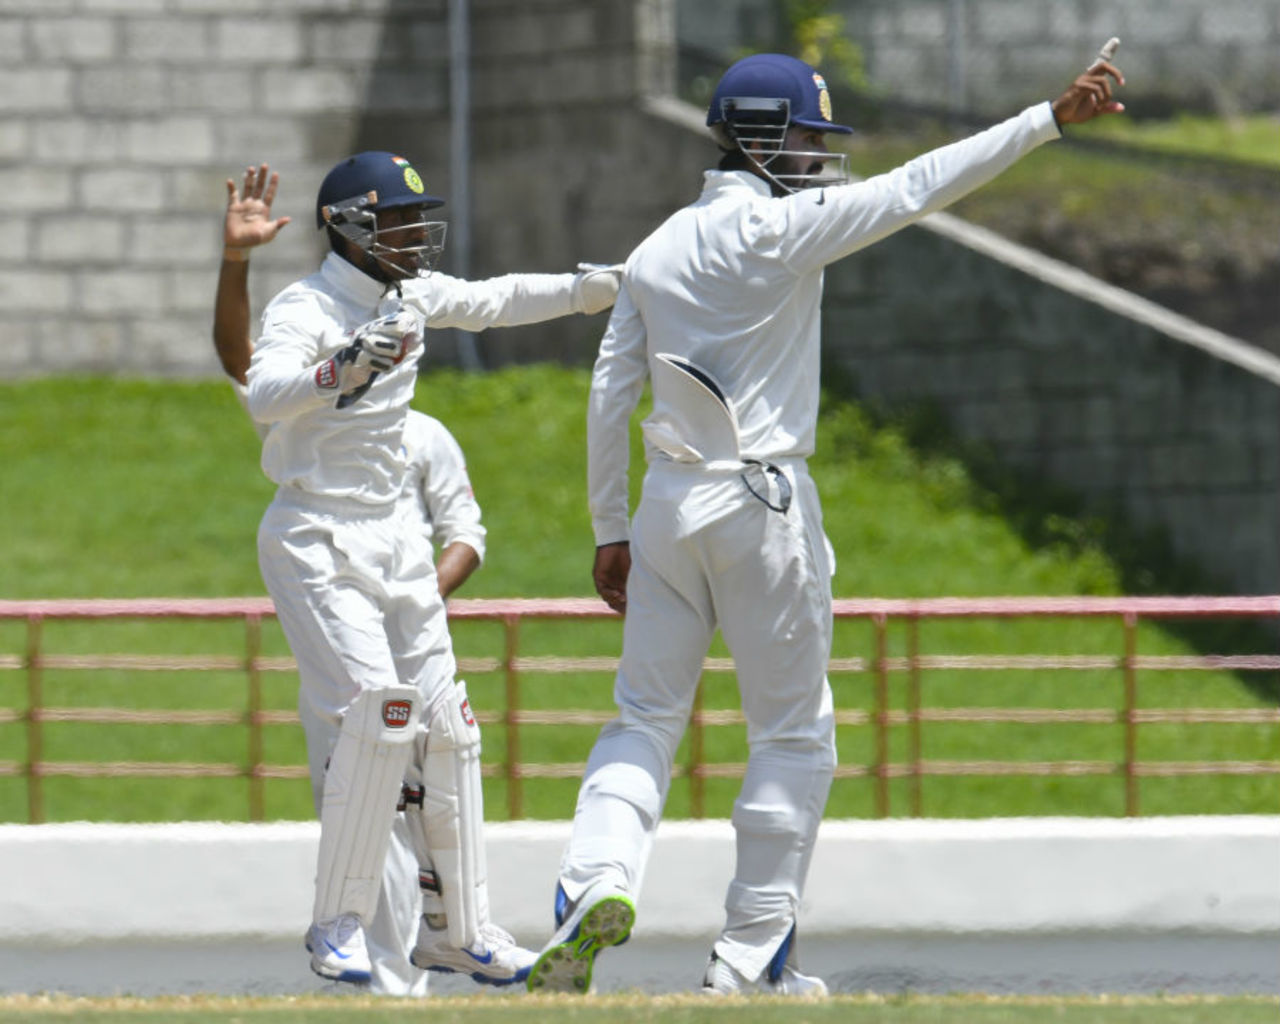 Wriddhiman Saha appeals for a stumping, West Indies v India, 3rd Test, Gros Islet, 5th day, August 13, 2016